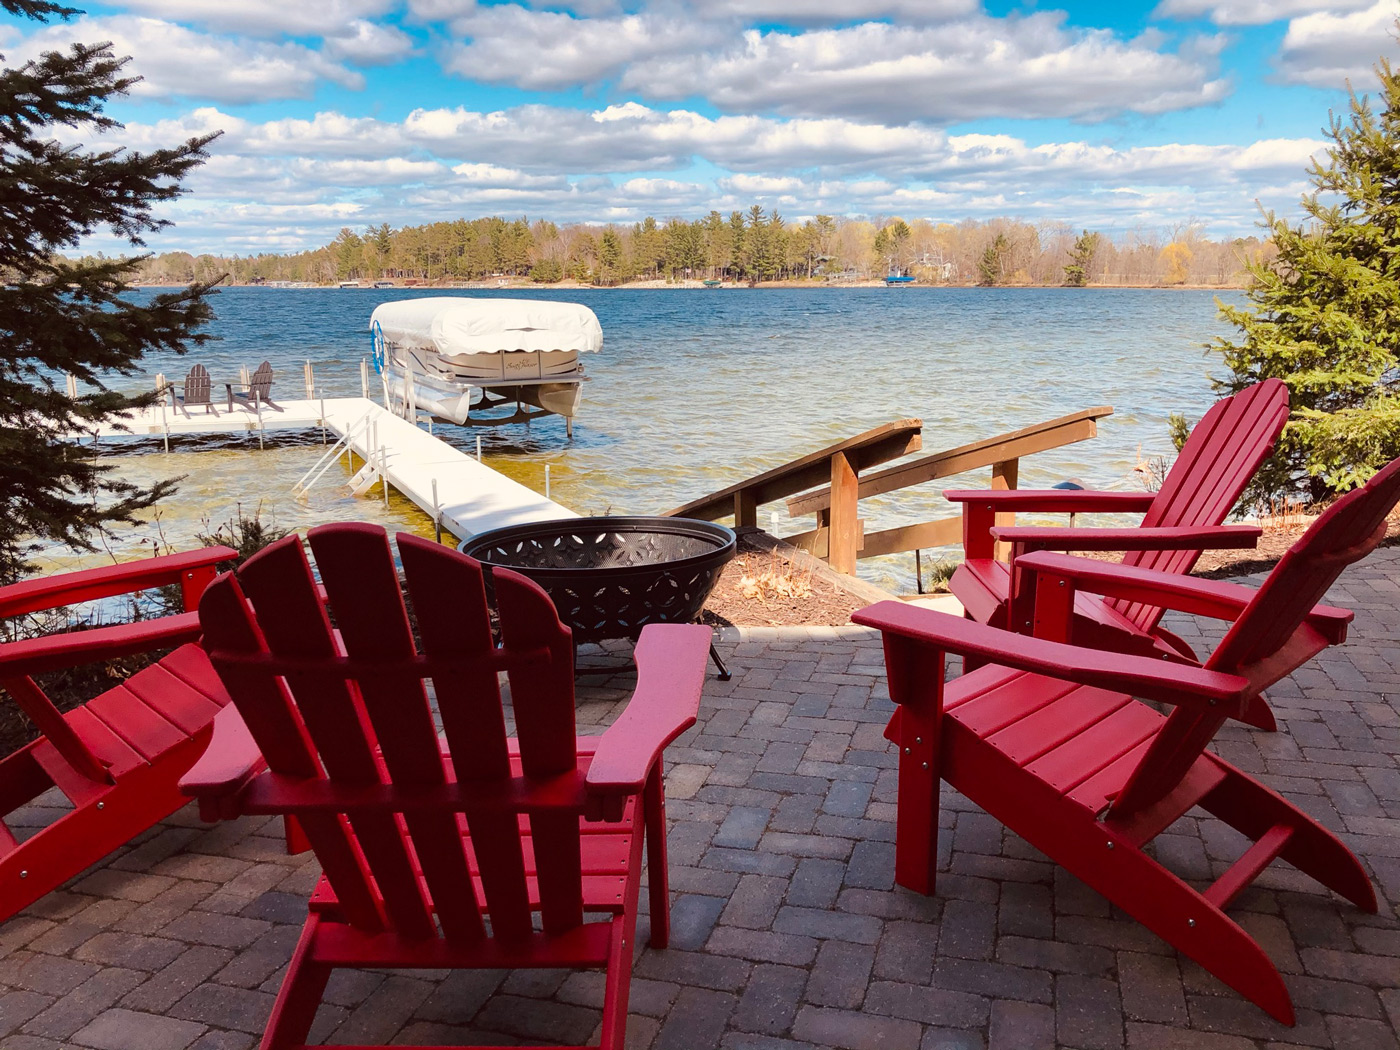 Adirondack chairs around fire pit overlooking a dock on a lake